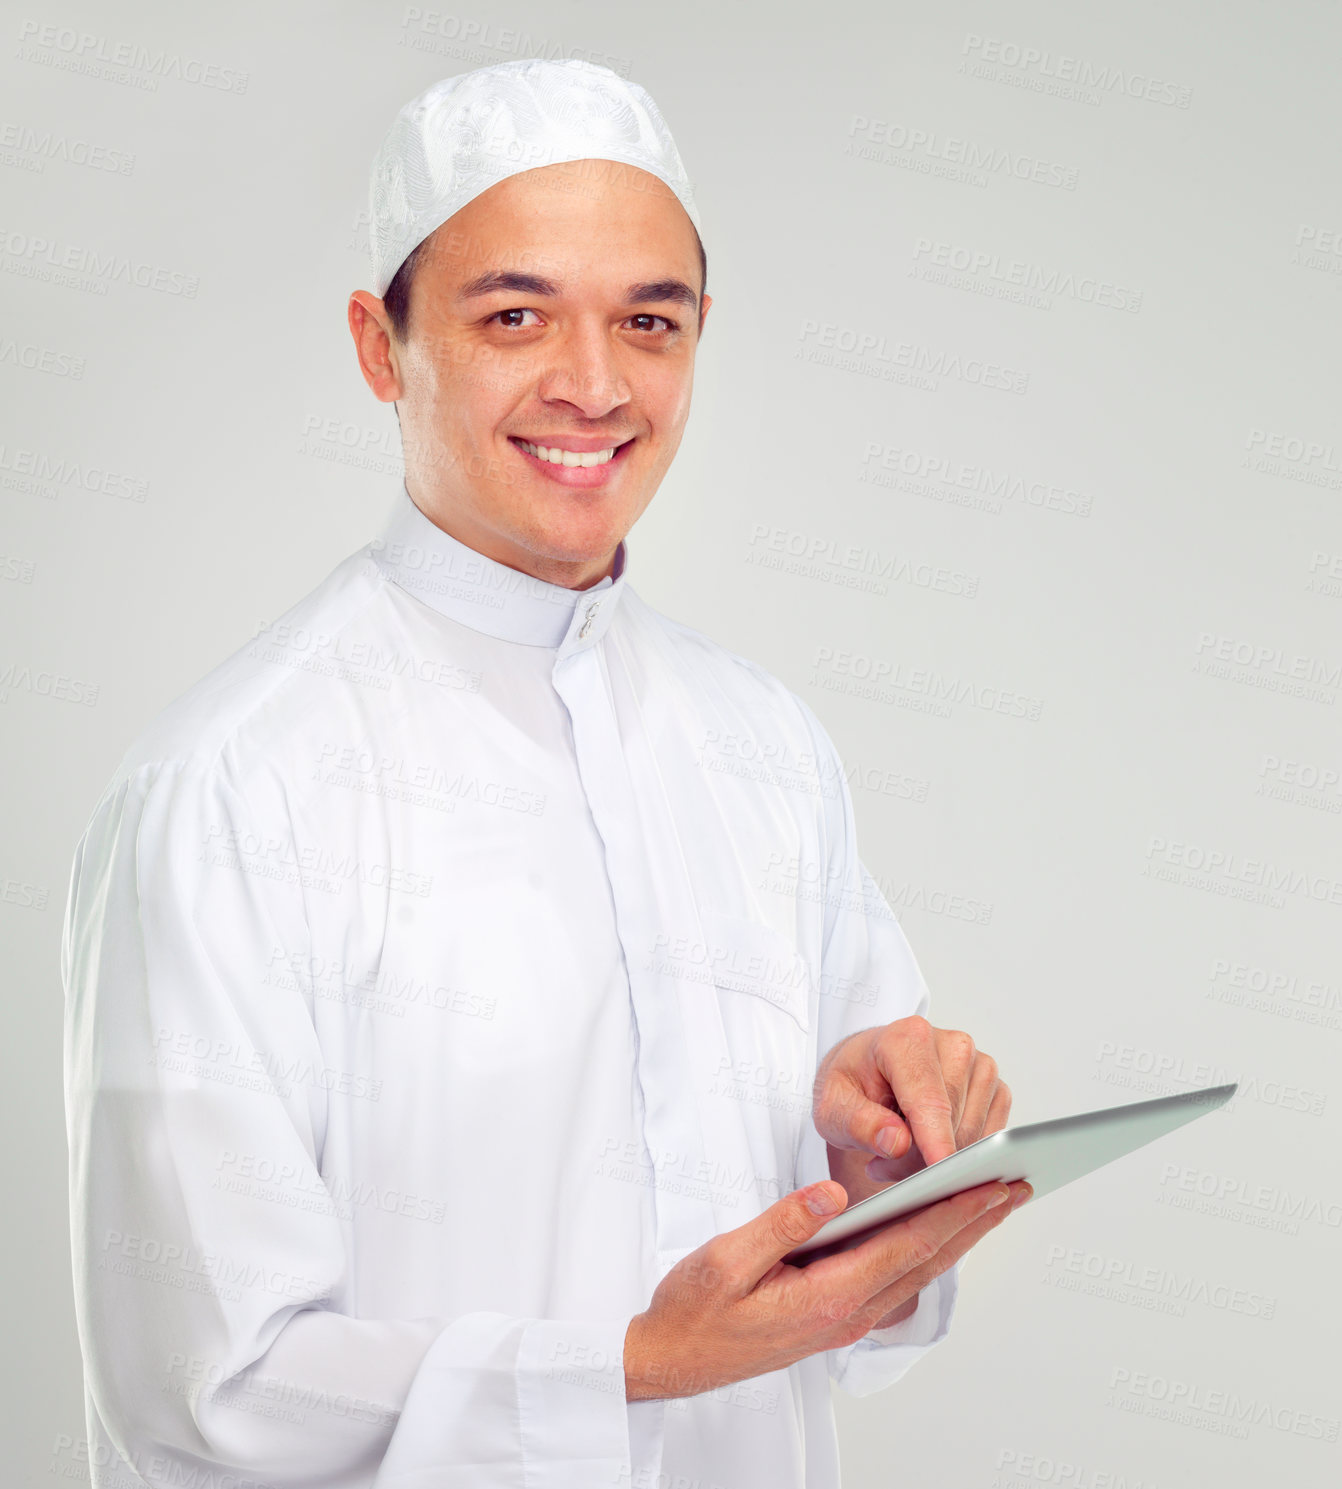 Buy stock photo Islamic man, tablet and happy portrait for Muslim reading, education or culture standing in white background. Young person, smile and digital tech learning for religious mindset isolated in studio